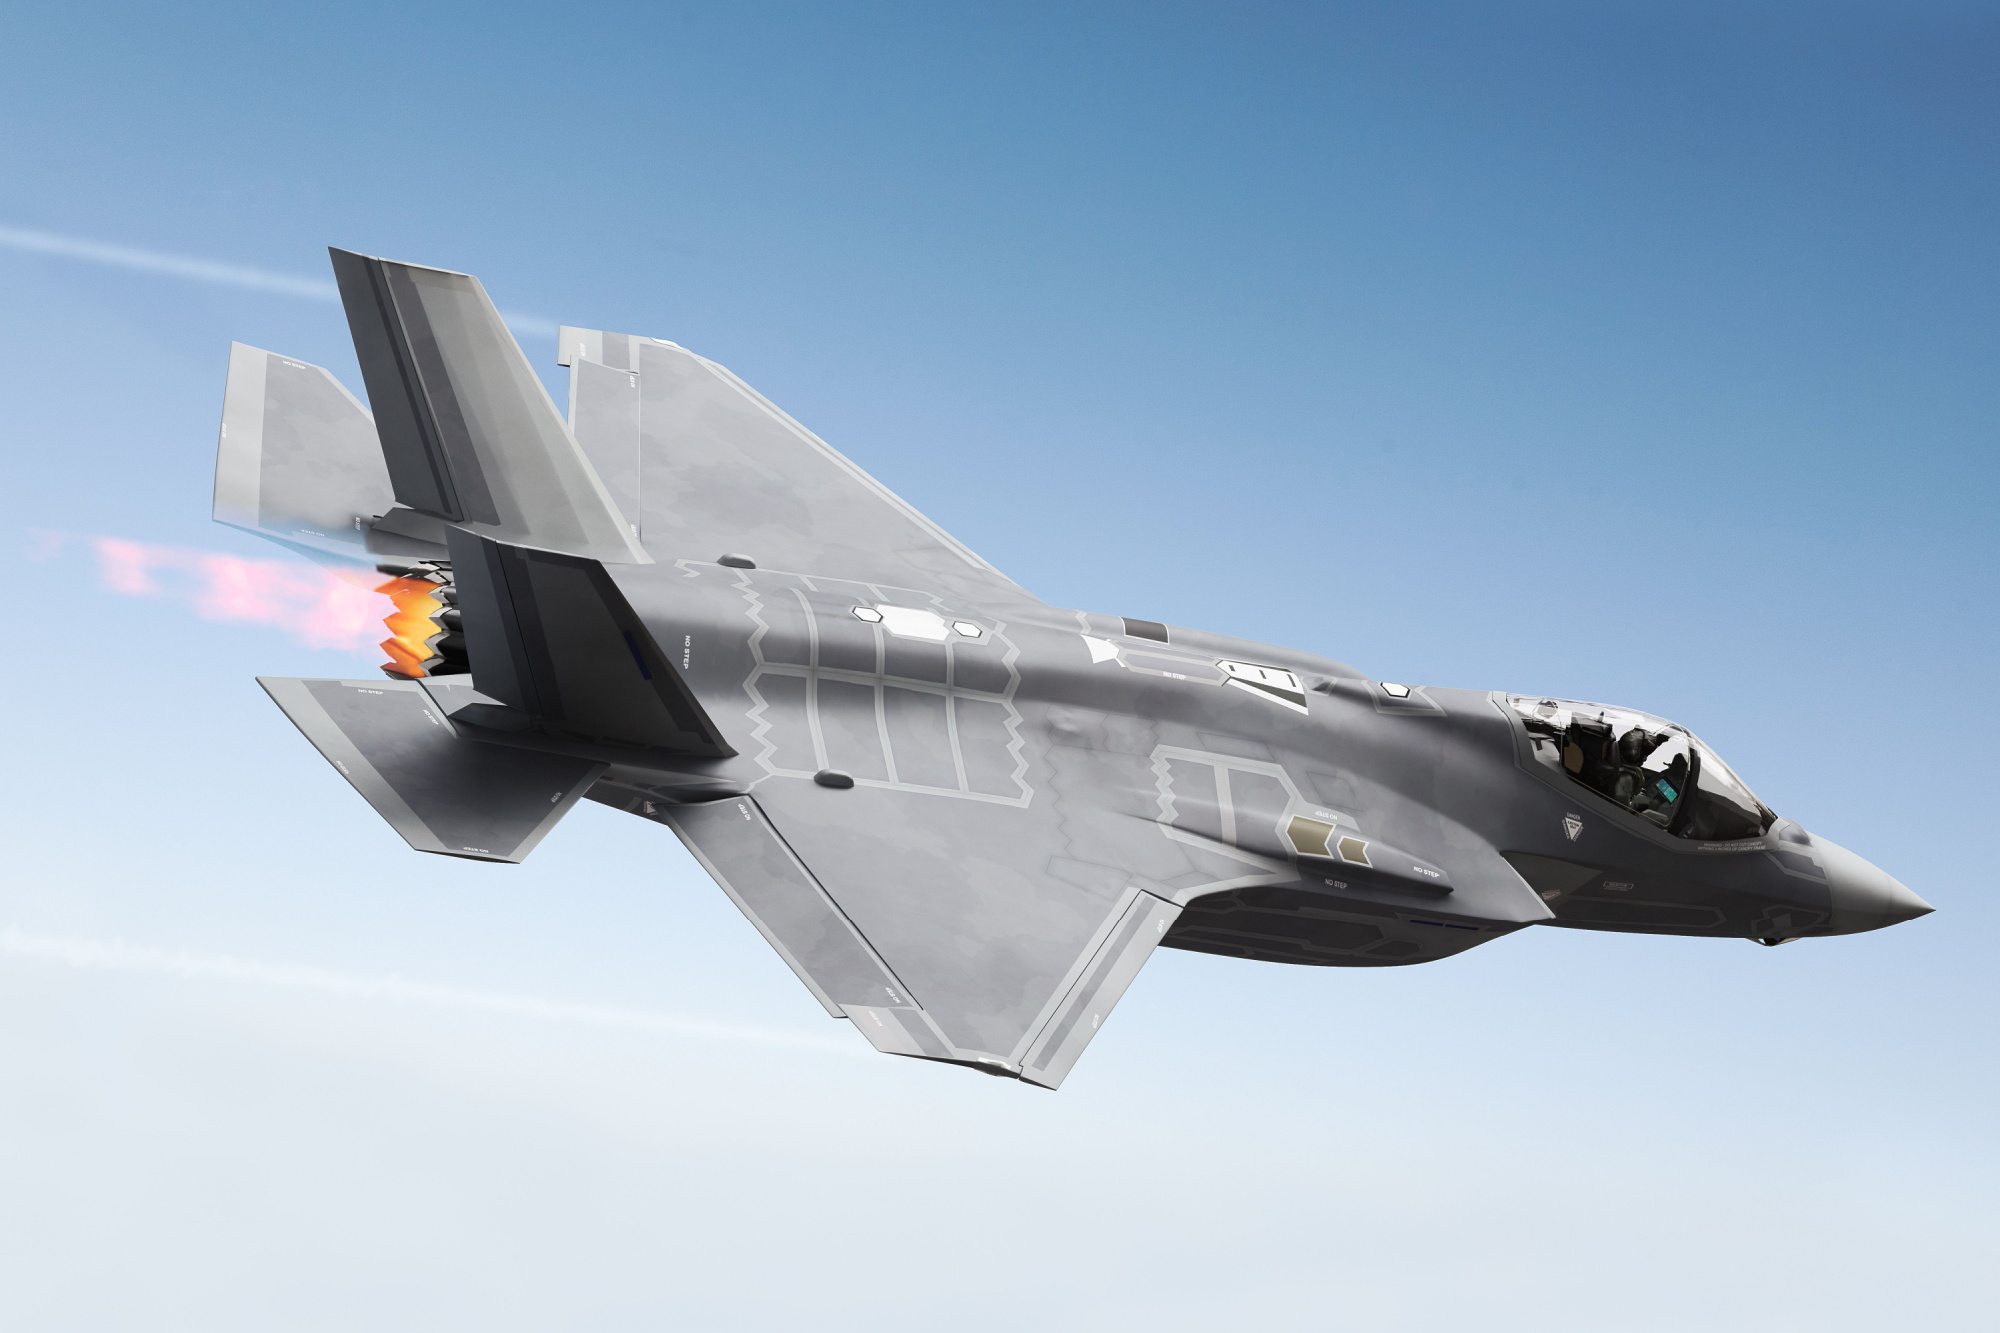 The Global Fighter Jet Market Is Changing. Can the U.S. Keep Up?